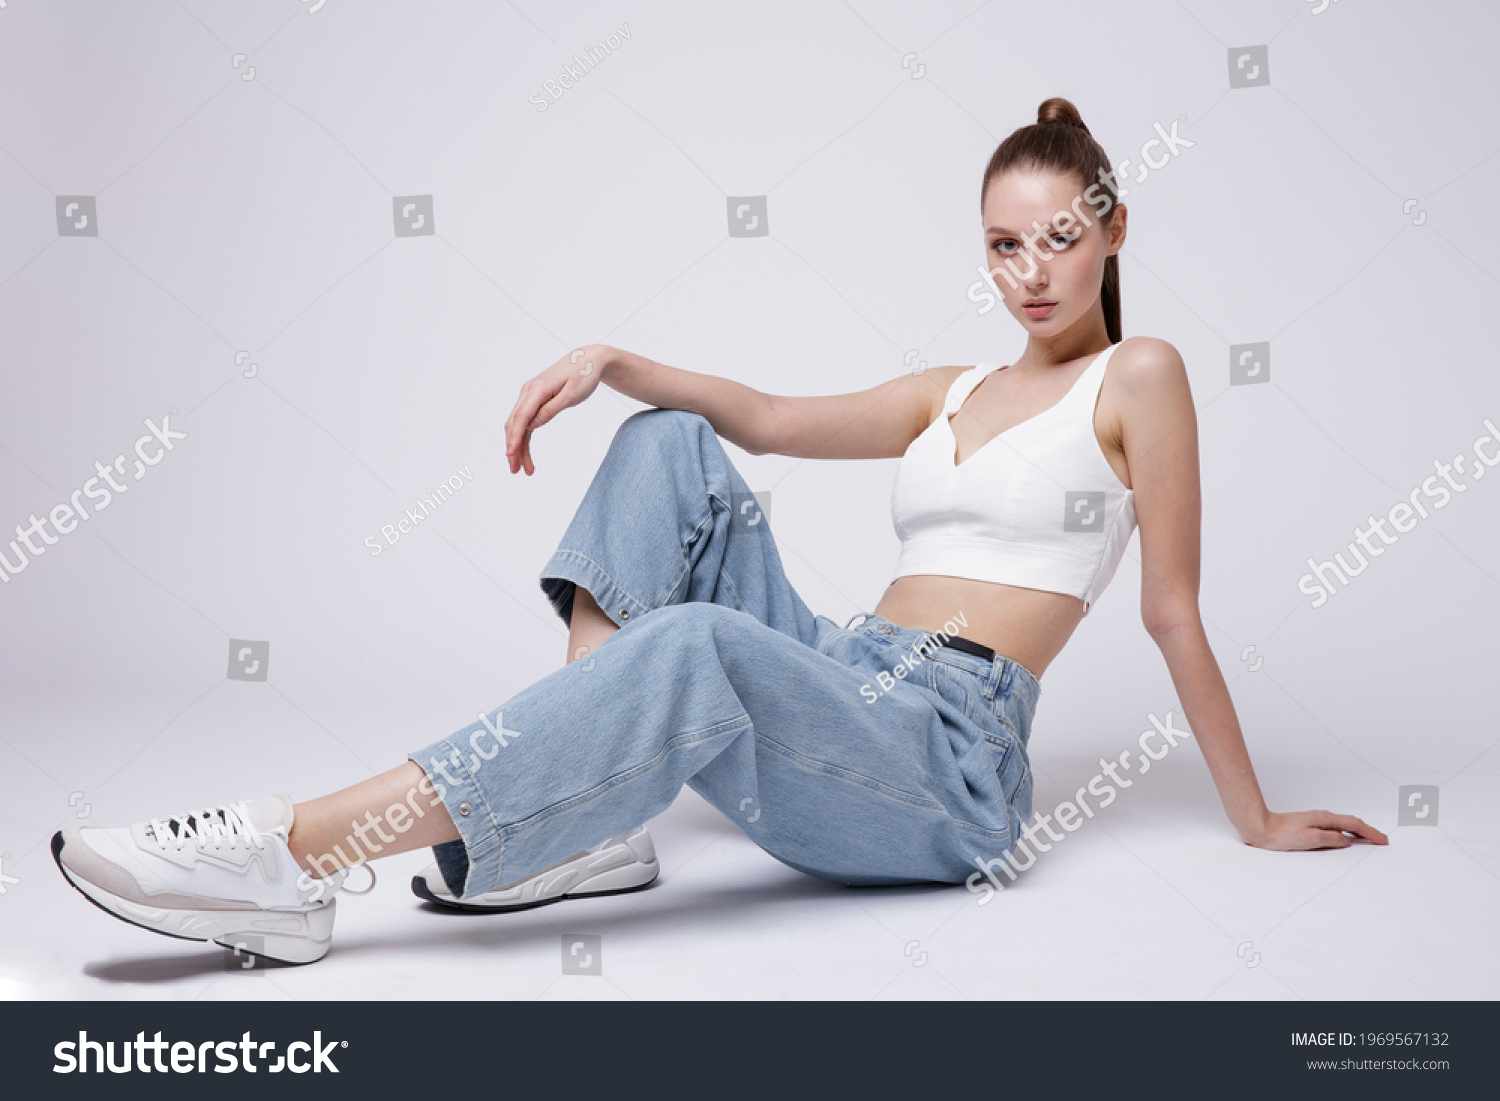 High fashion photo of a beautiful elegant young woman in a pretty white top and sneakers, blue denim jeans posing over white, soft gray background. Studio Shot. The model is sitting #1969567132